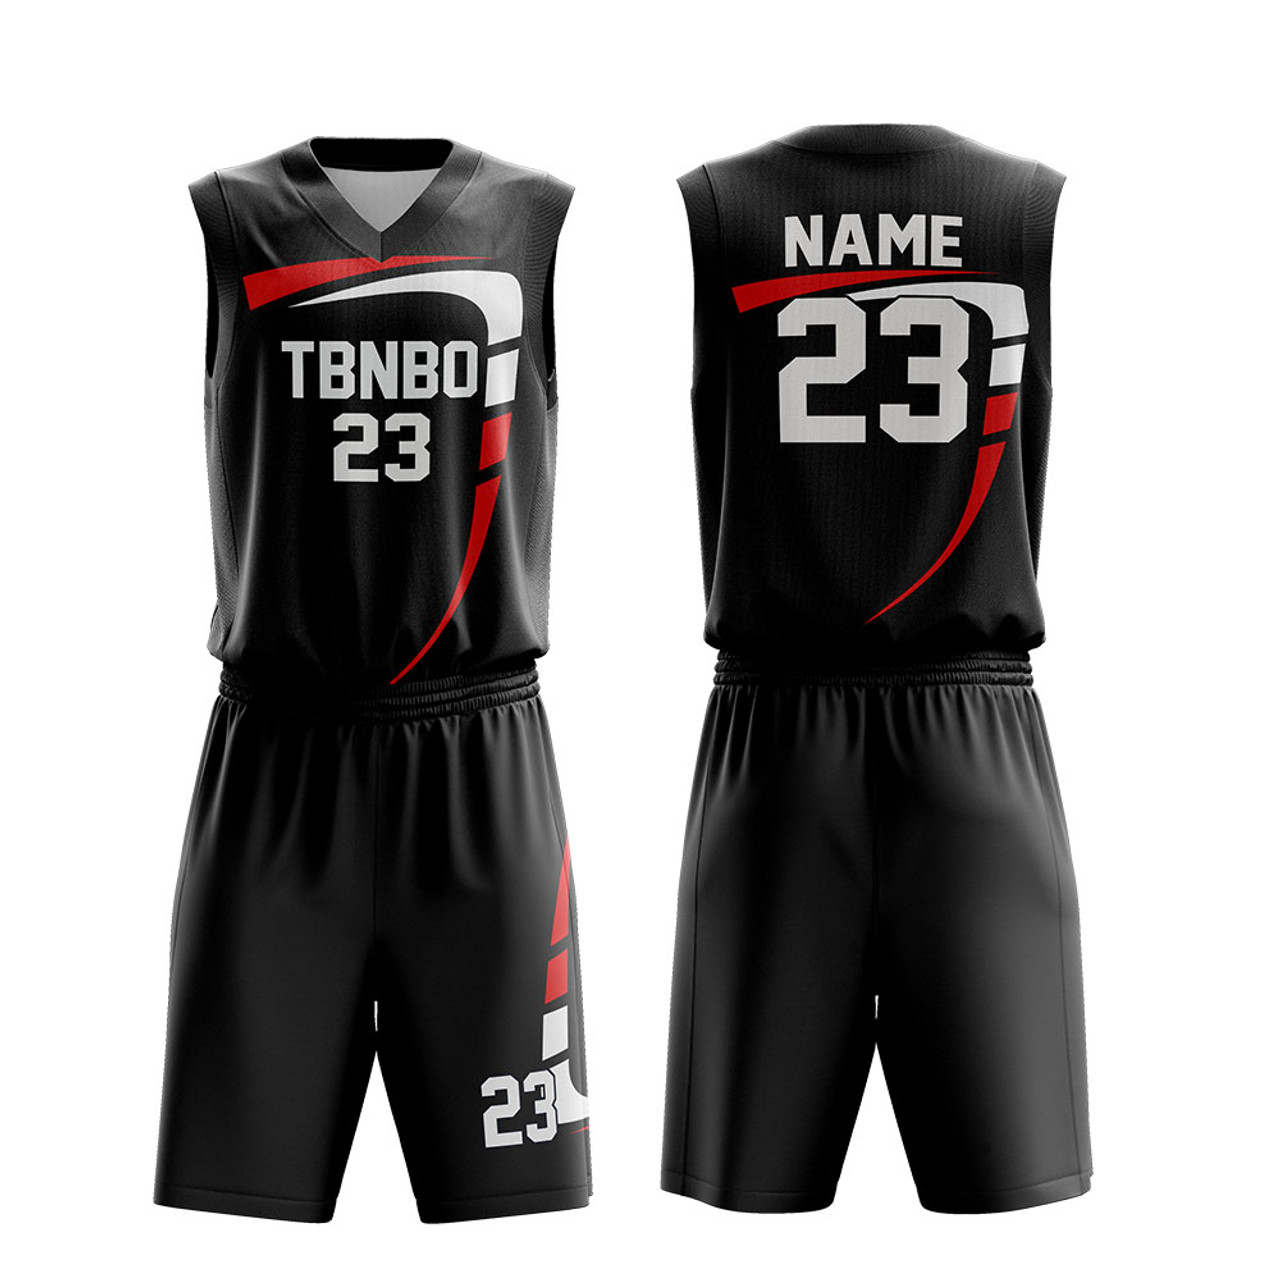 sublimation basketball jersey design red and black